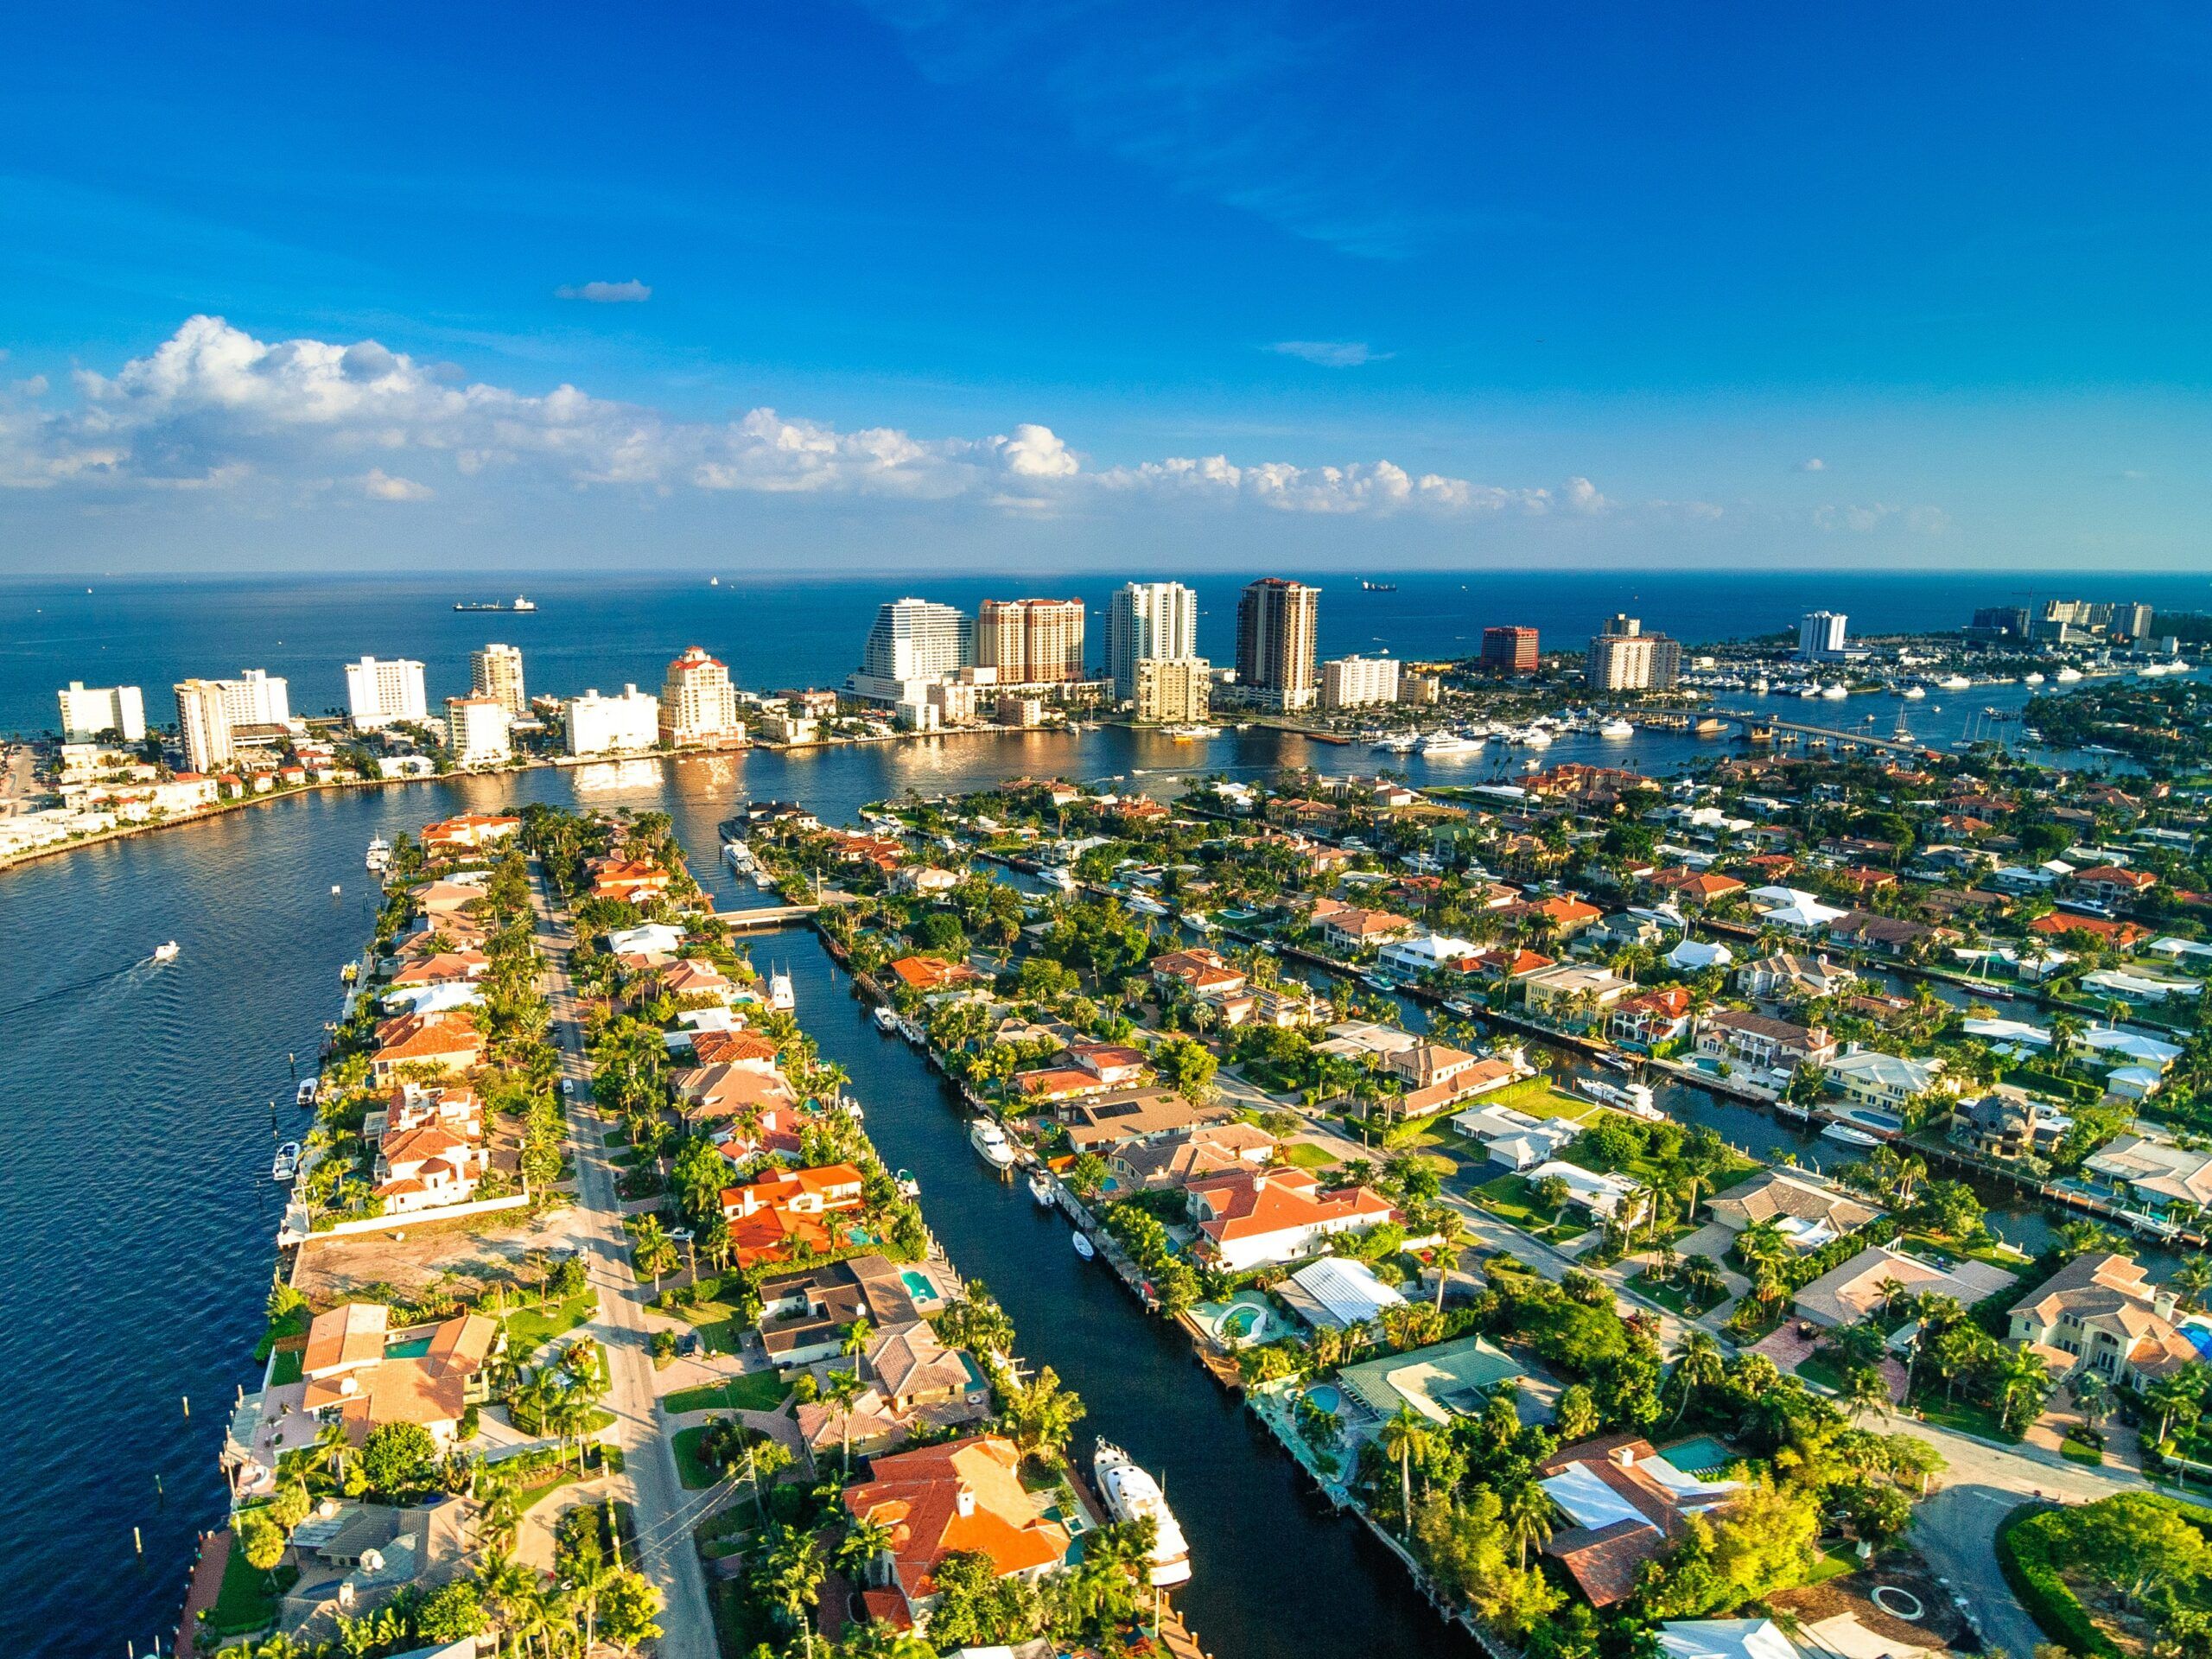 Luxury Vacation Stays Are Perfect for Your Fort Lauderdale Dream Getaway